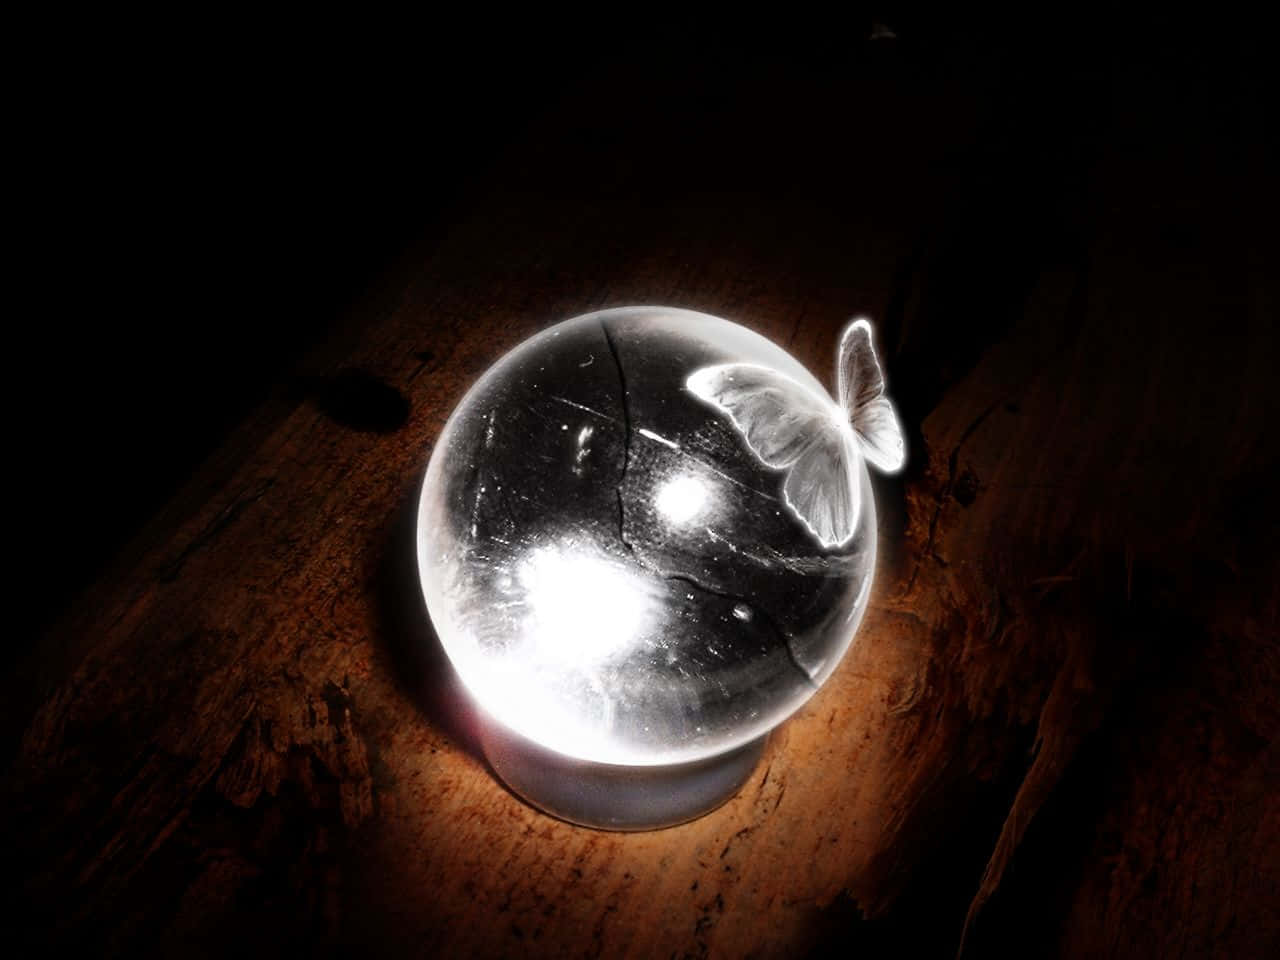 Crystal Ball on Wooden Surface Wallpaper